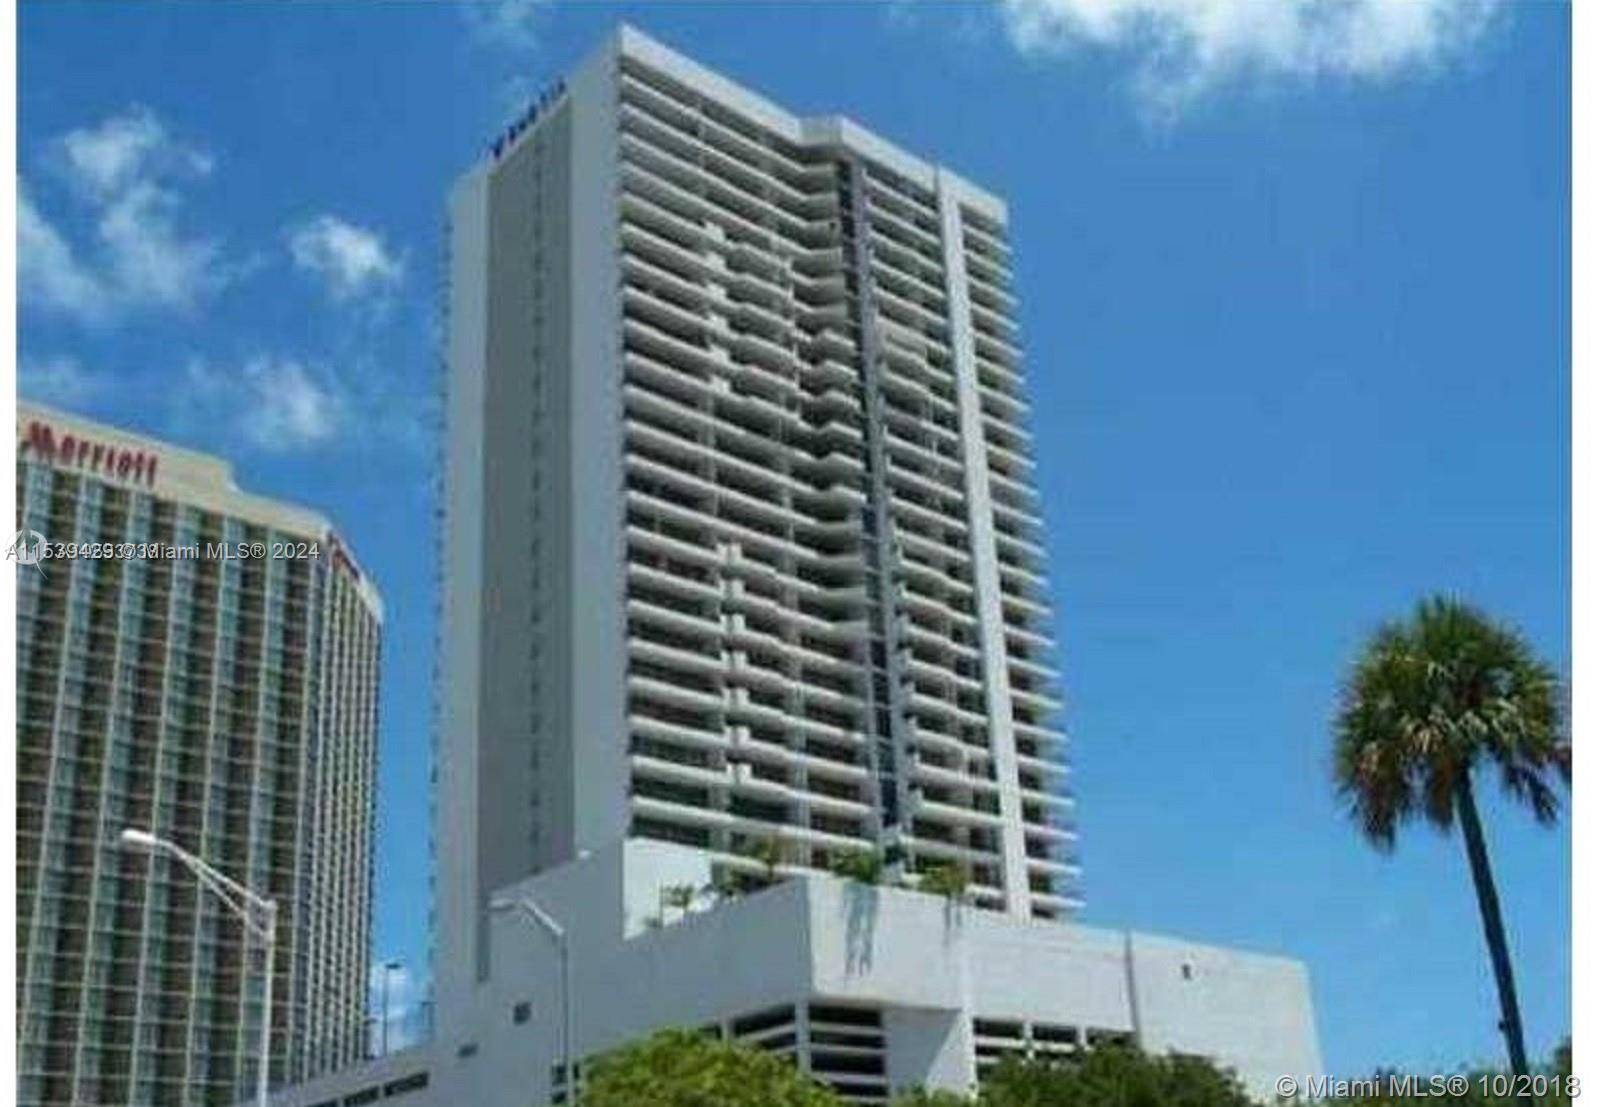 Beautiful spacious 1 1. 5 baths with Amazing views of Biscayne Bay including Venetian Causeway, MacArthur Causeway Downtown Miami located in Edgewater.